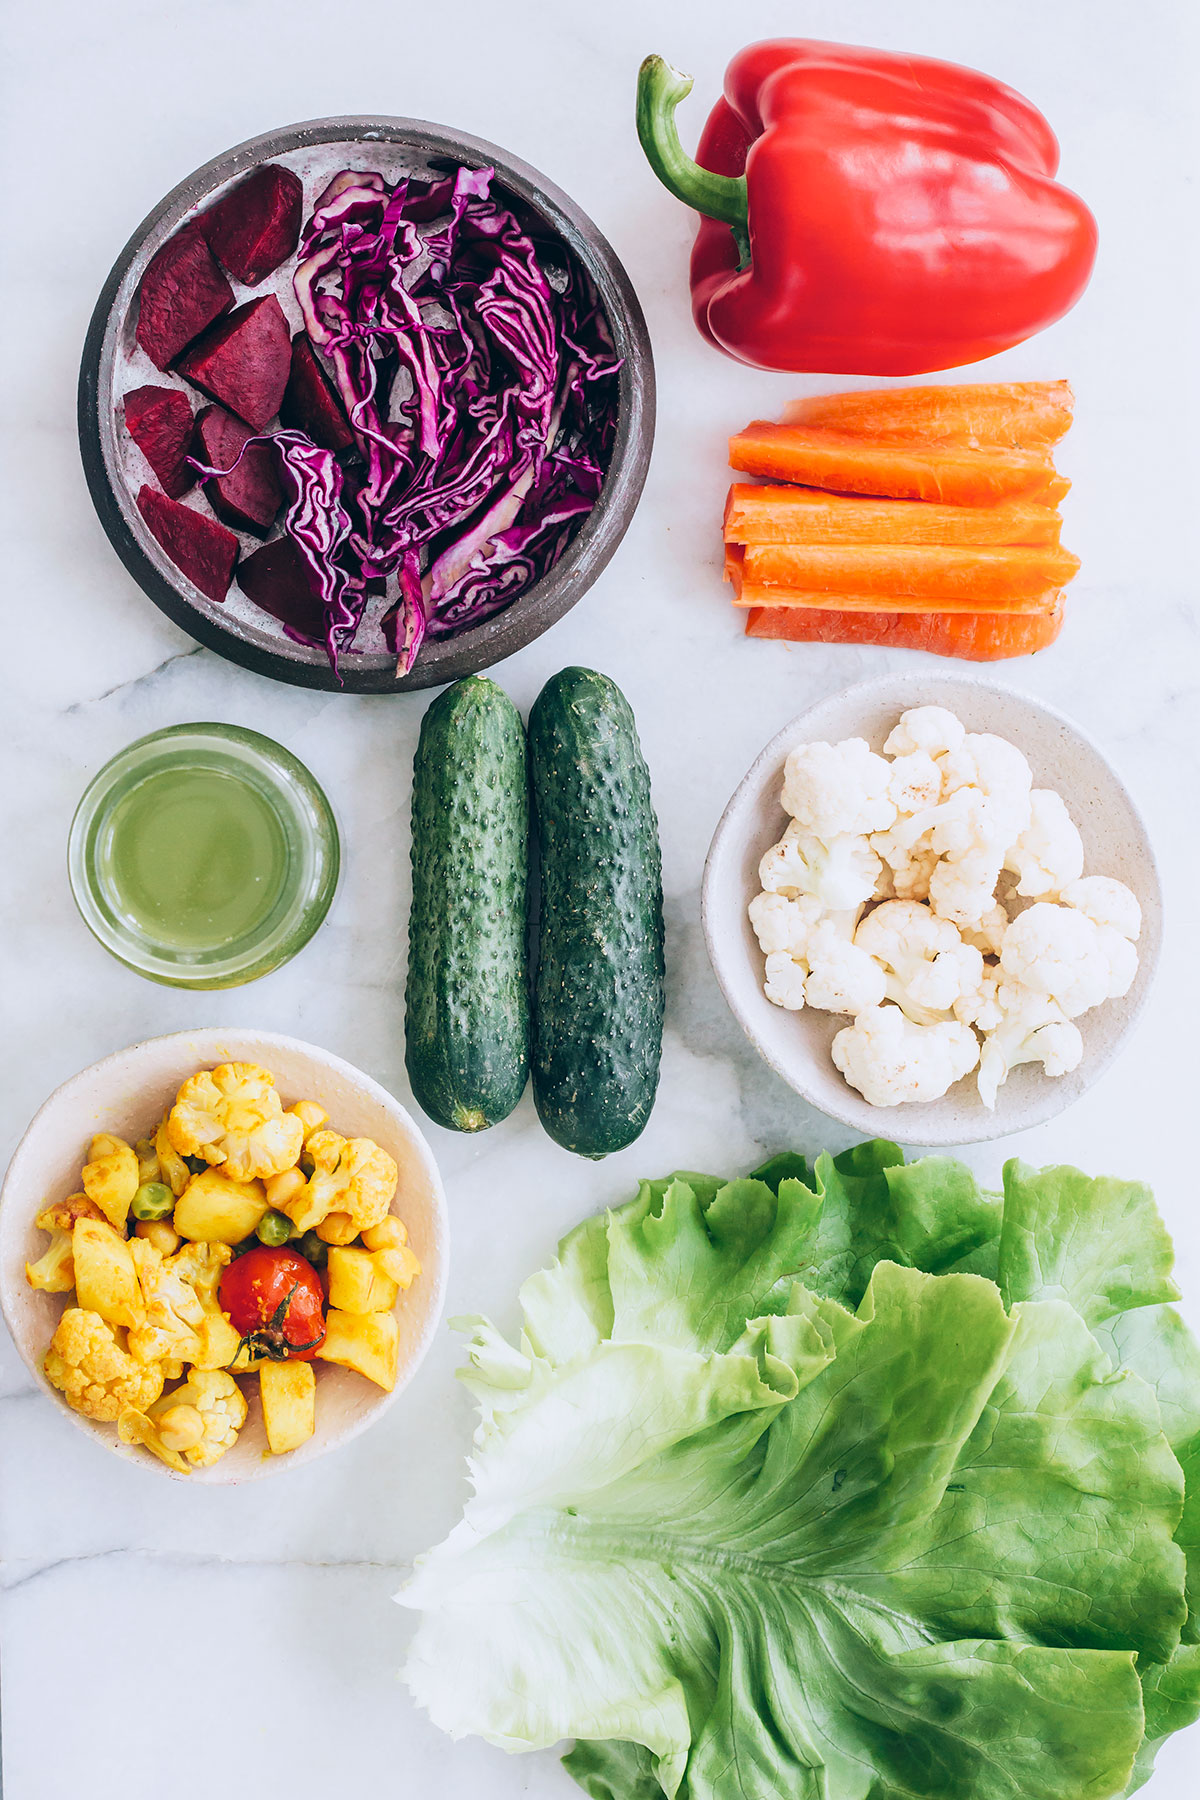 Here's What It Looks Like to Get 8 Servings of Vegetables in a Day